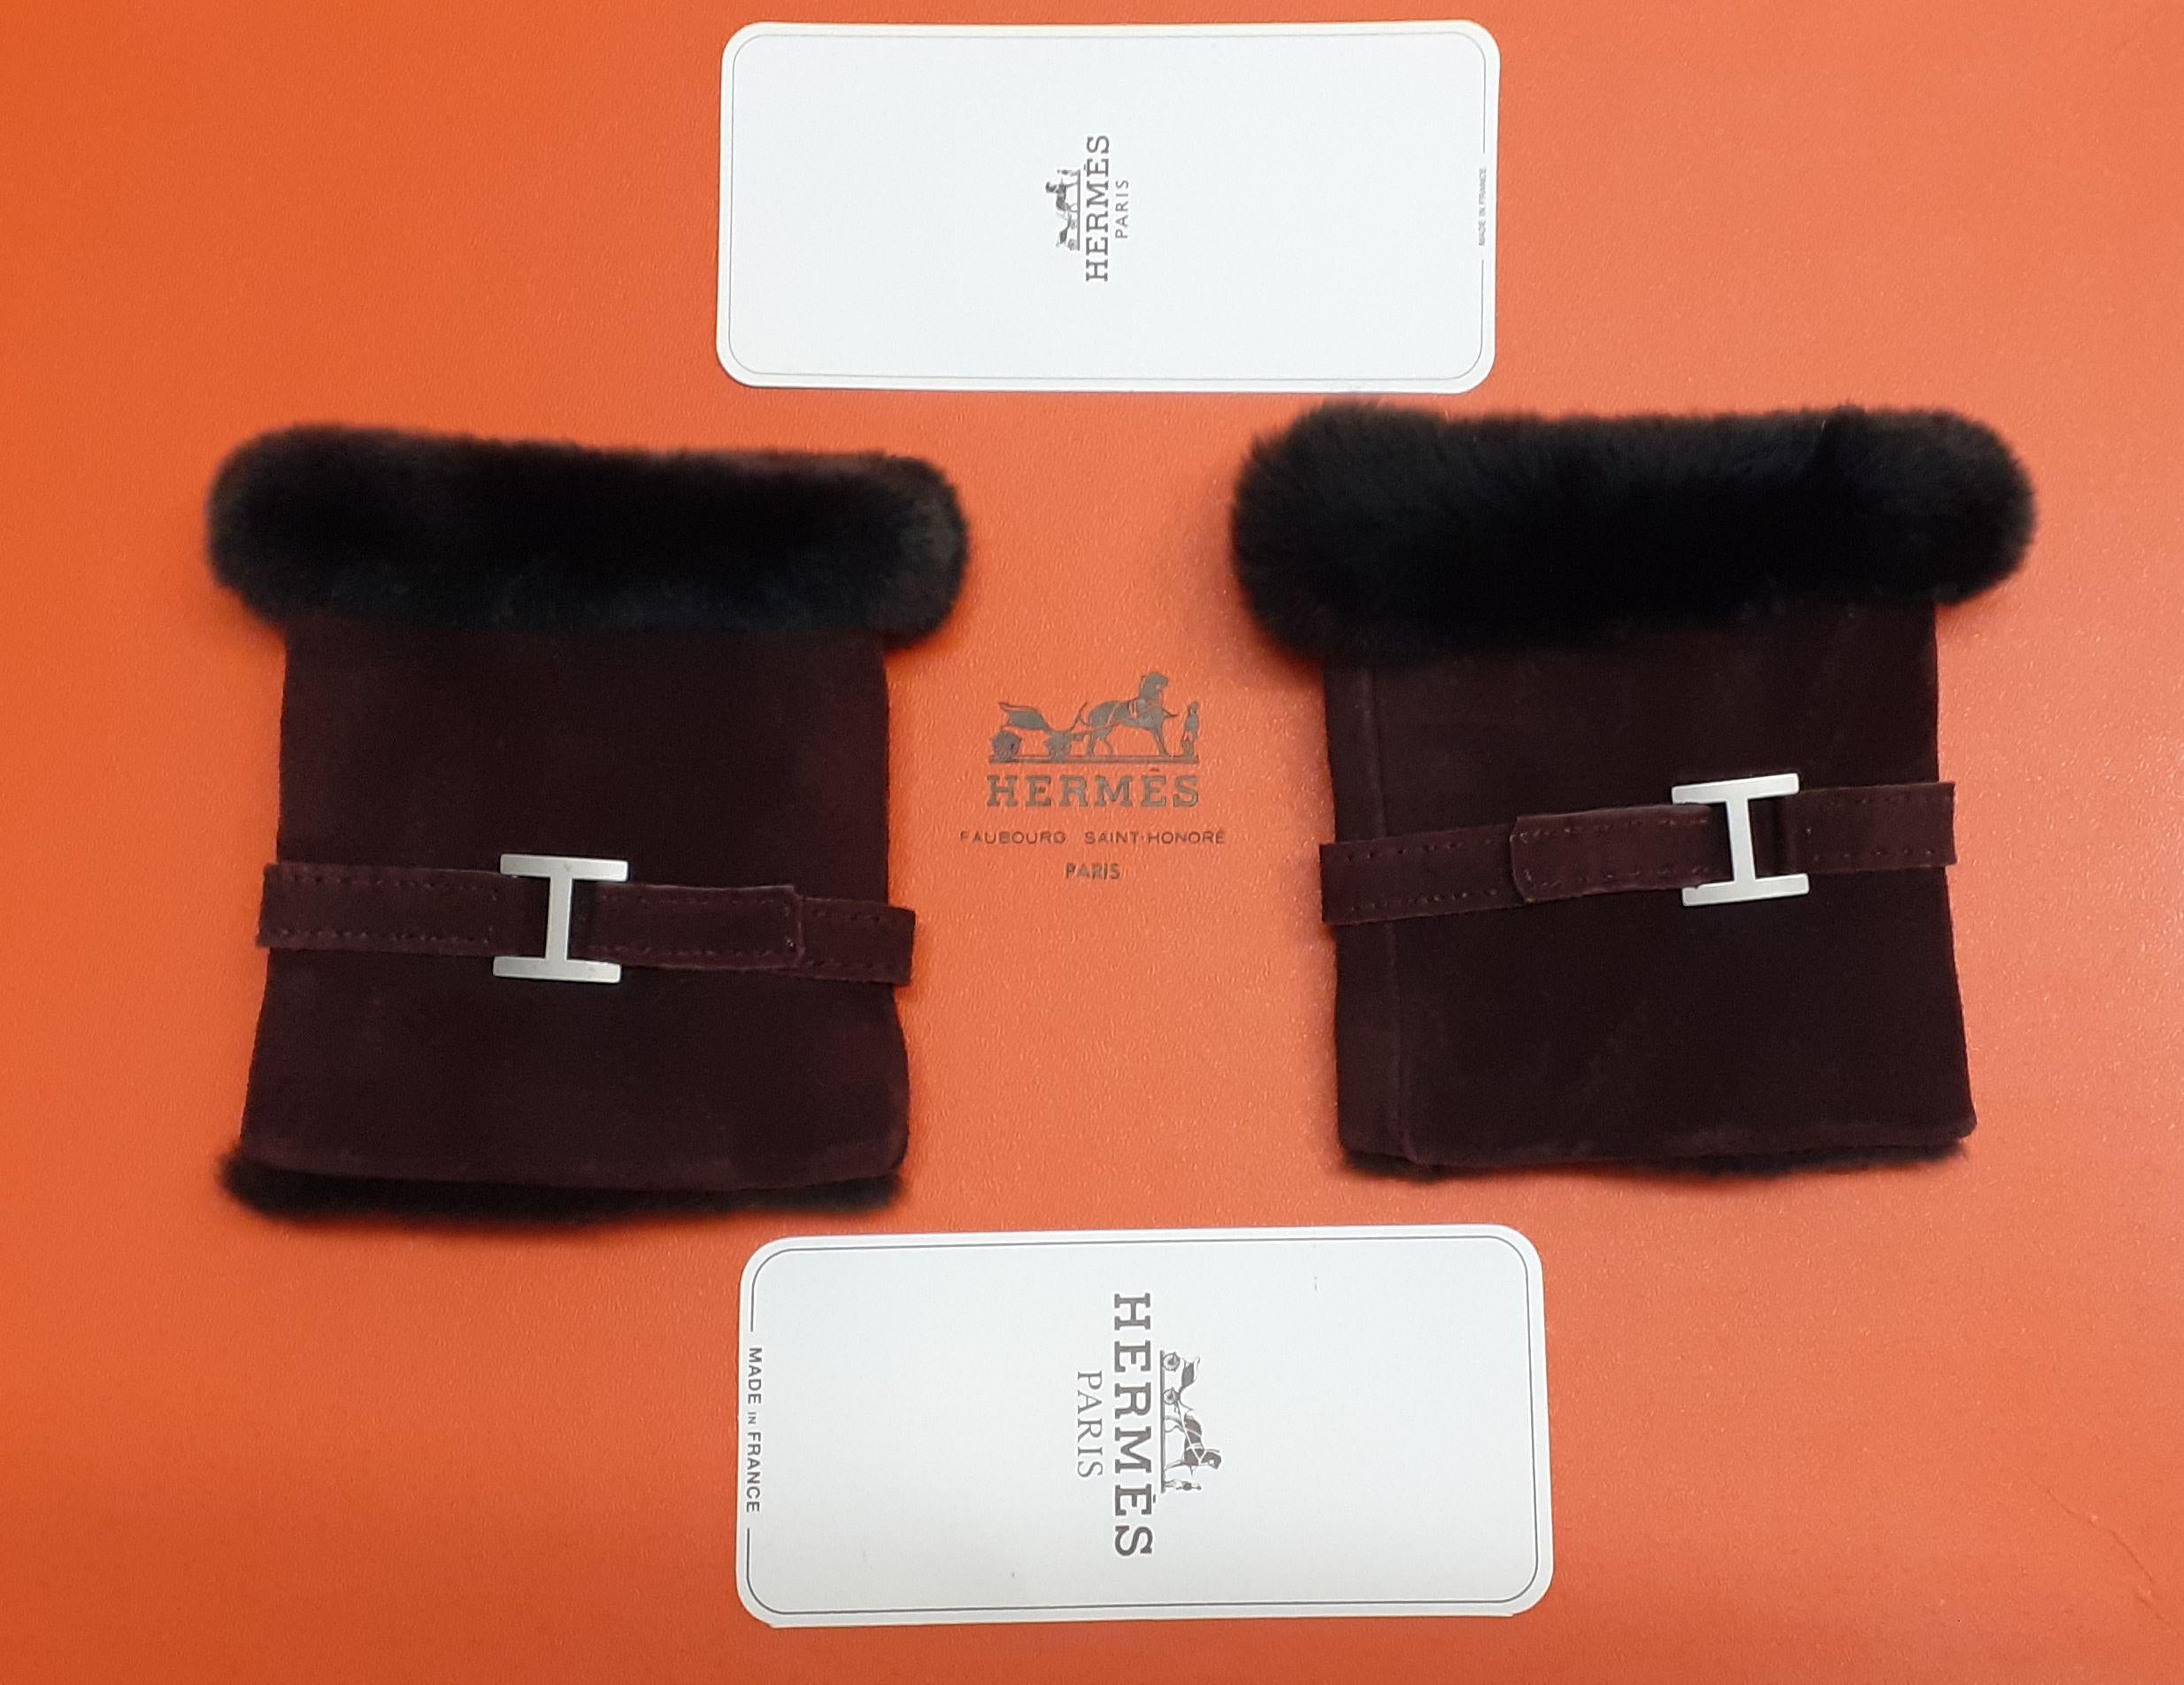 Warm and Cozy Authentic Hermès Wrist Warmers

Removable Muffs

Made of Leather and Fur

Probably vintage items, given the Hermès cards

Adorned by an H in silver-tone metal

Colorways: Deep Burgundy Leather / Black Fur

Super soft, a dream to